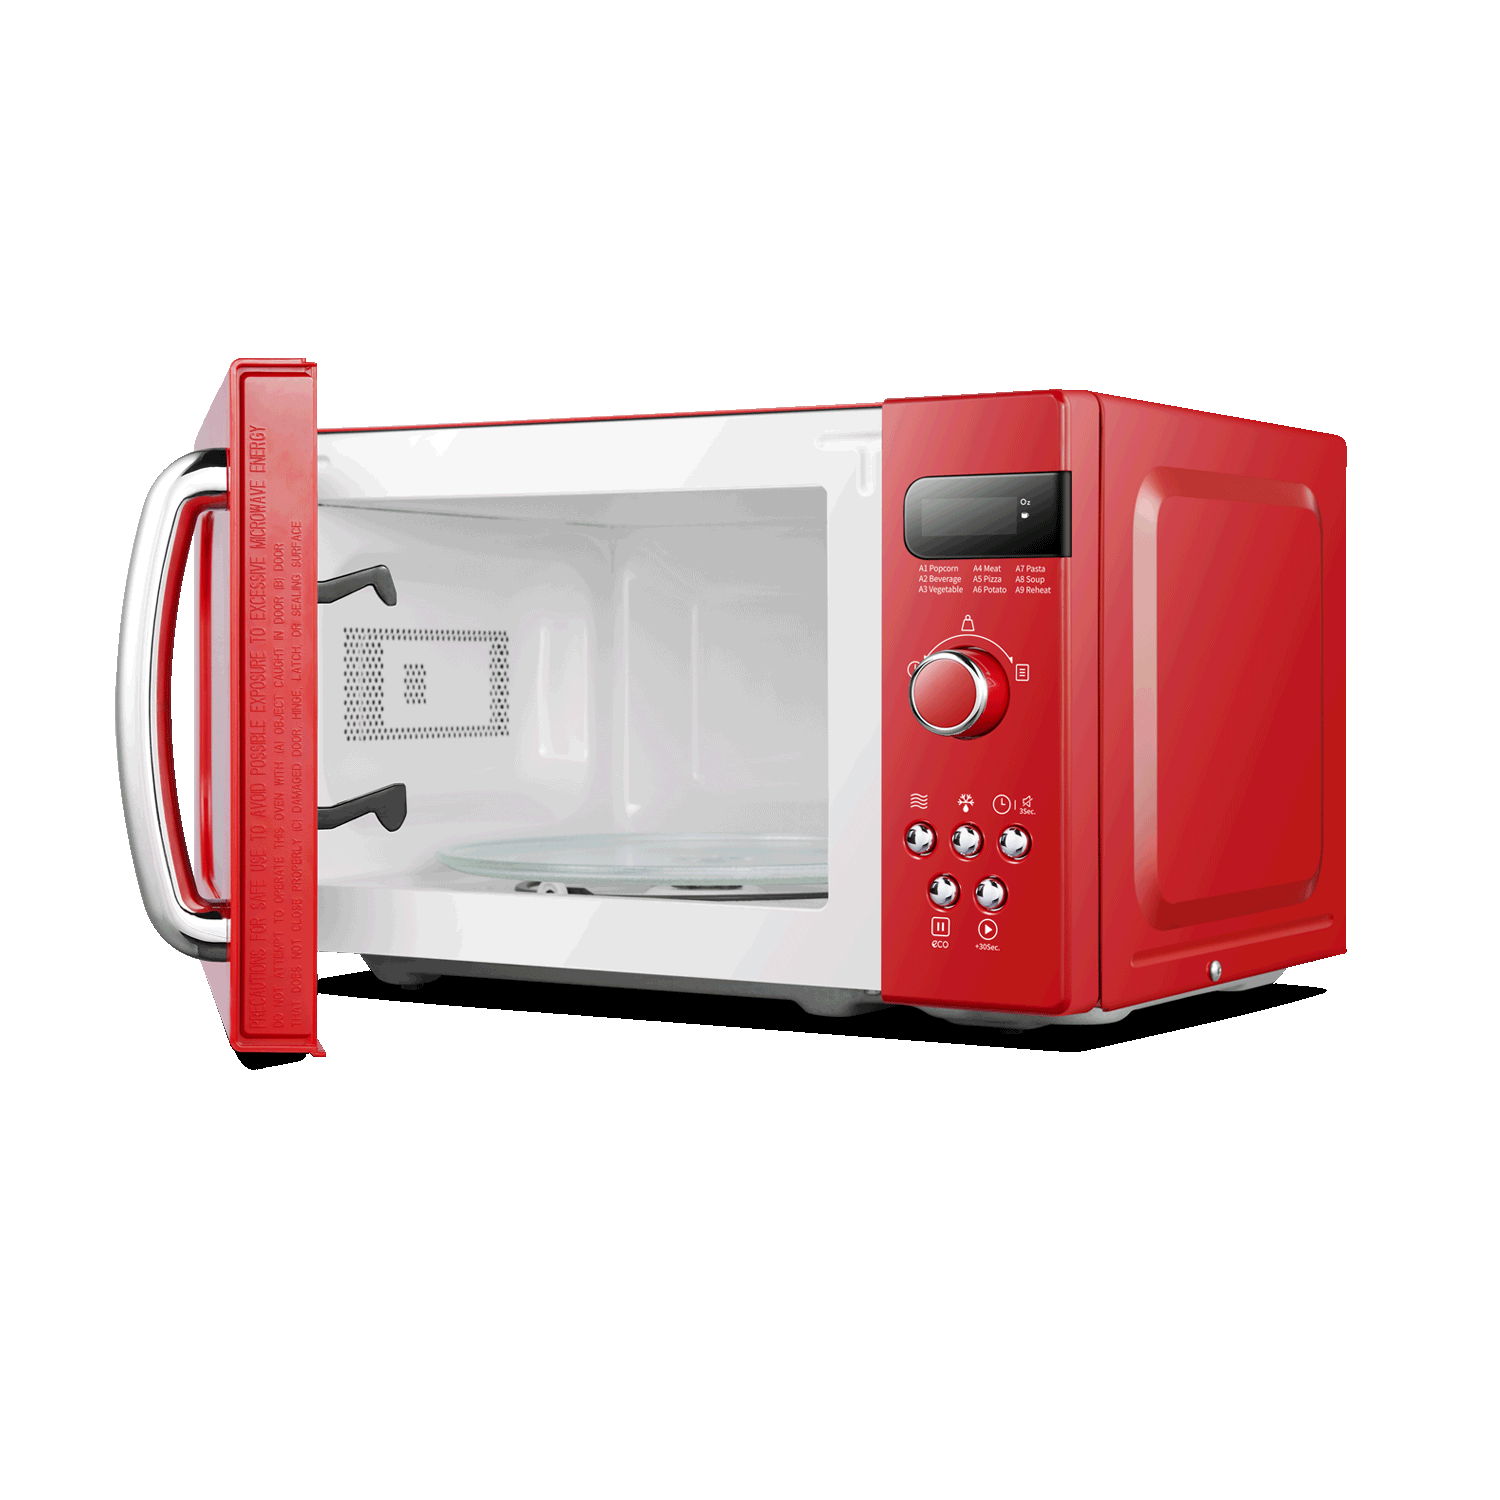 https://d1pjg4o0tbonat.cloudfront.net/content/dam/comfee-aem/global/products/kitchen-appliances/comfee-microwave-oven-passionate-red/kv4.png/jcr:content/renditions/cq5dam.compression.png